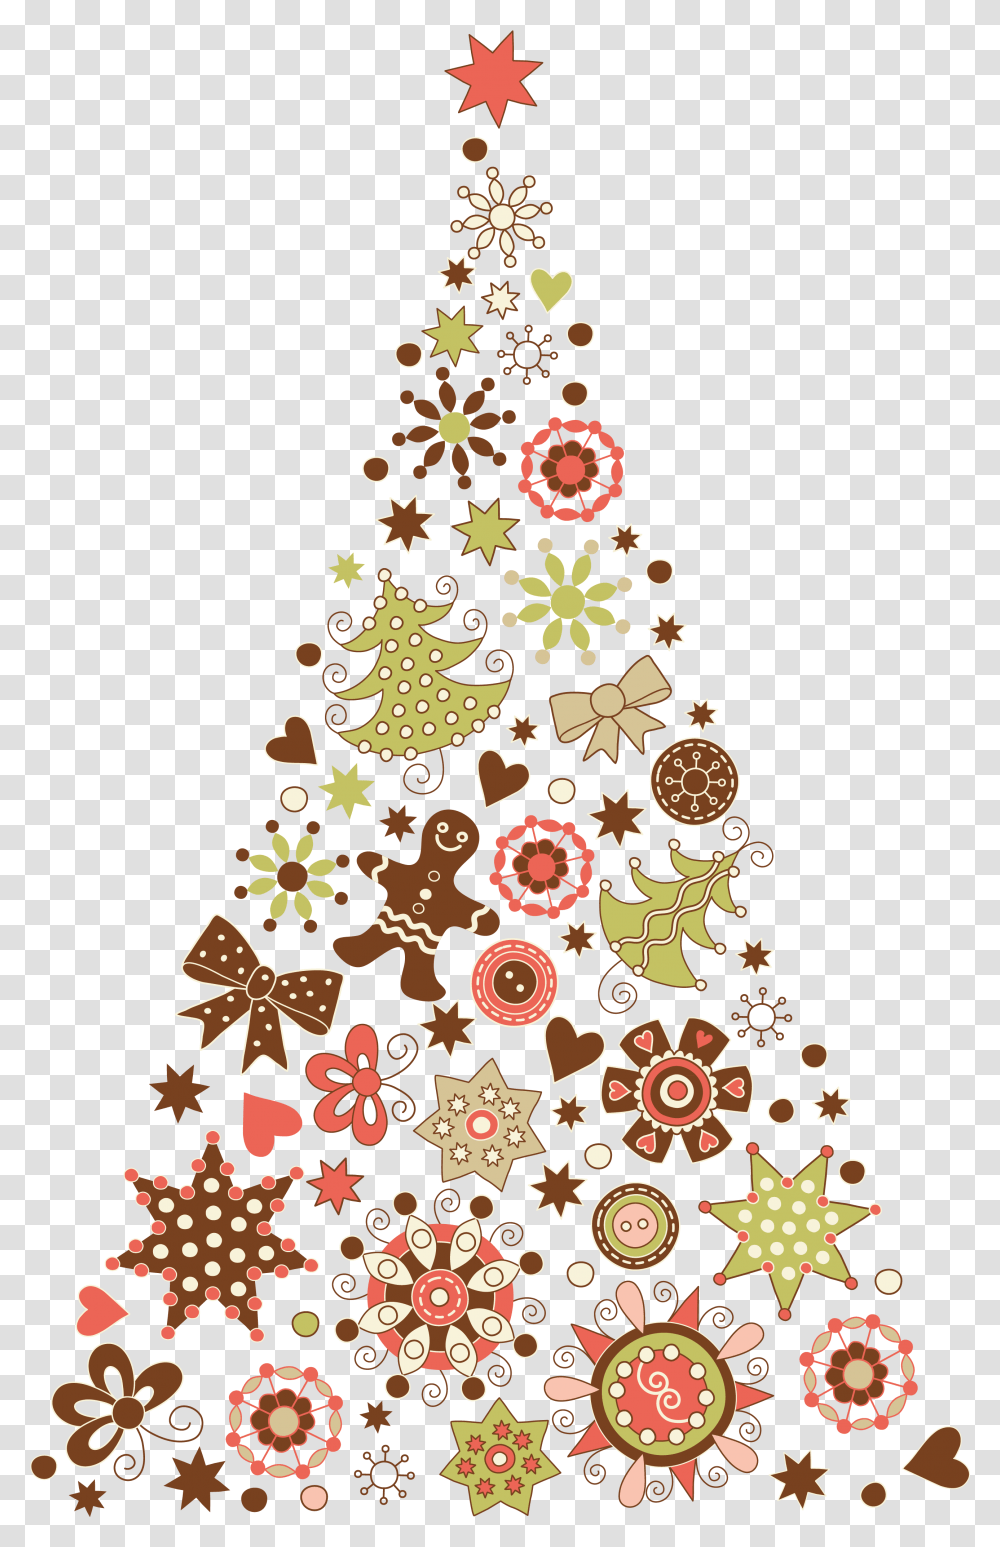 Christmas Wallpaper Iphone Email Business Christmas Card Christmas Card Wallpaper Hd, Tree, Plant, Christmas Tree, Ornament Transparent Png